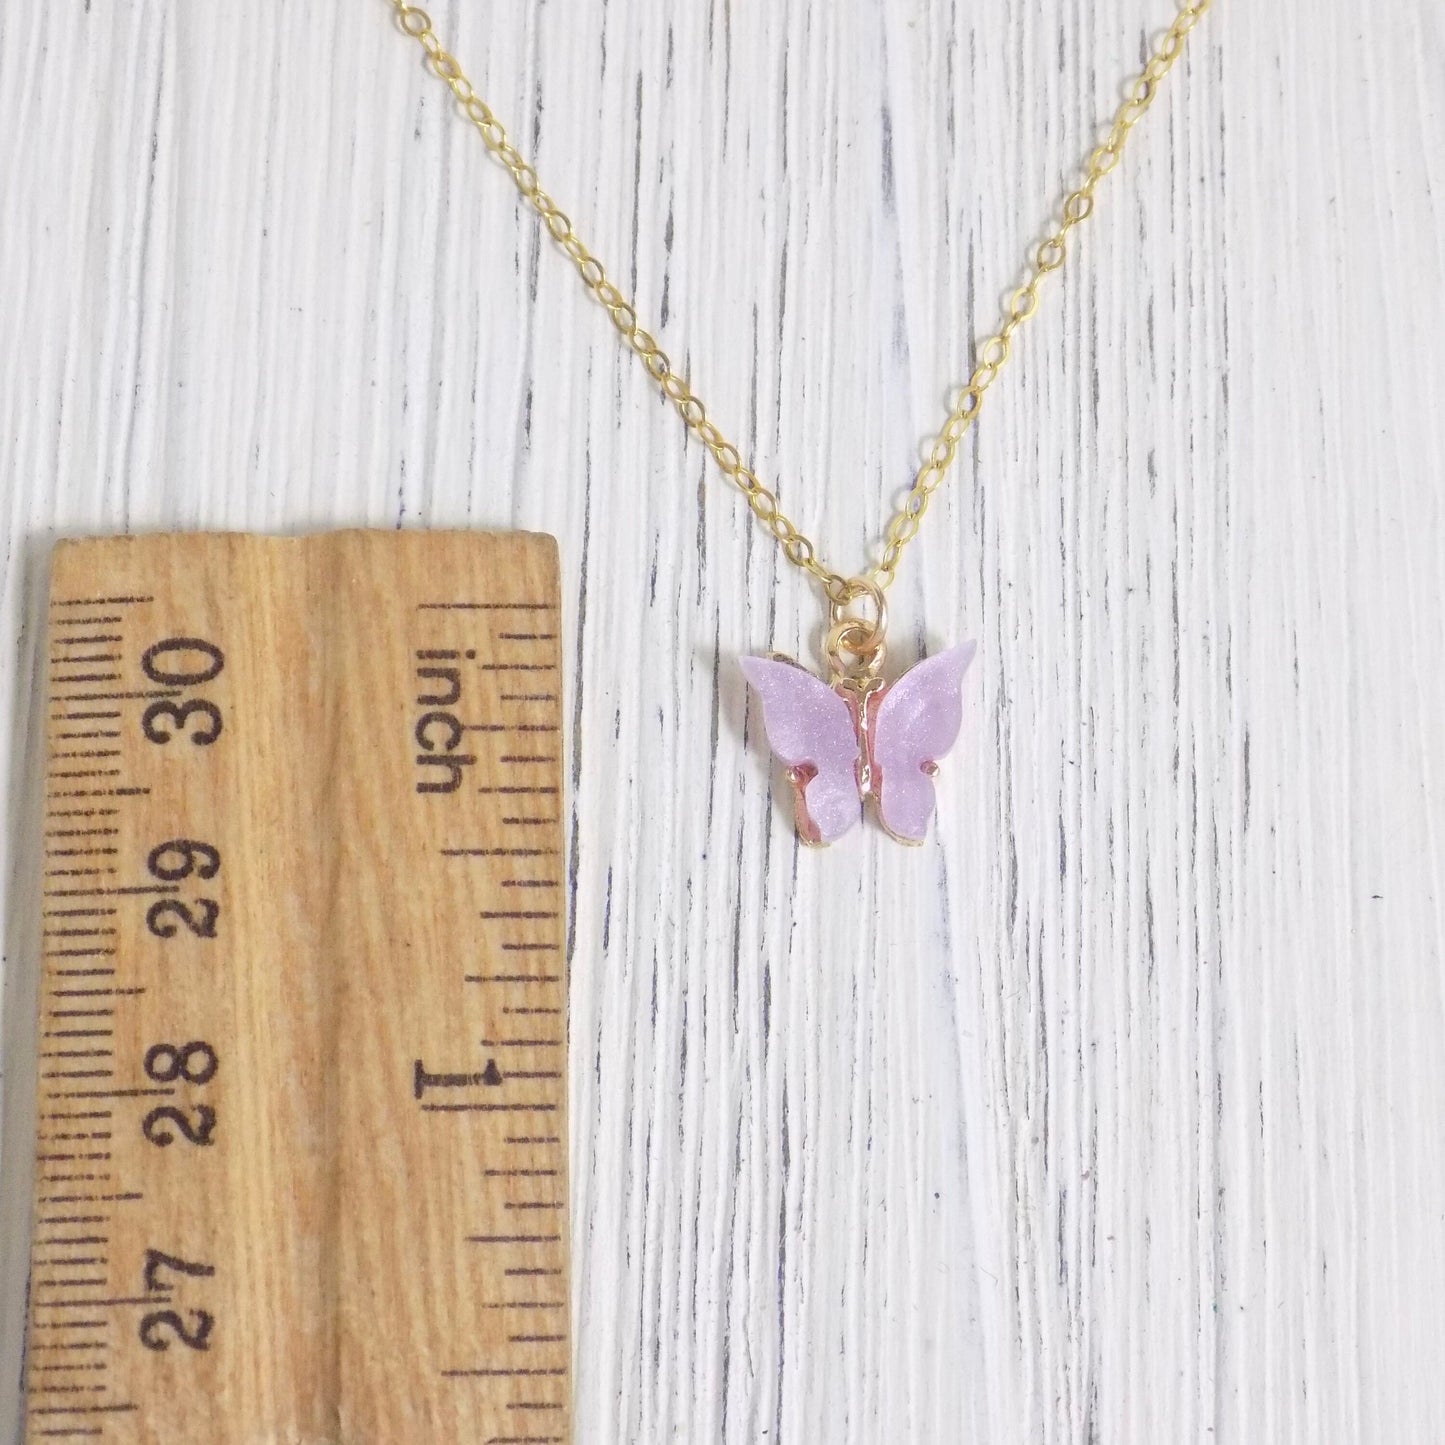 Gold Butterfly Necklace - Minimalist Butterfly Charm Necklace - Blue Butterfly Pendant - Layering - Unique Christmas Gifts - L2-05